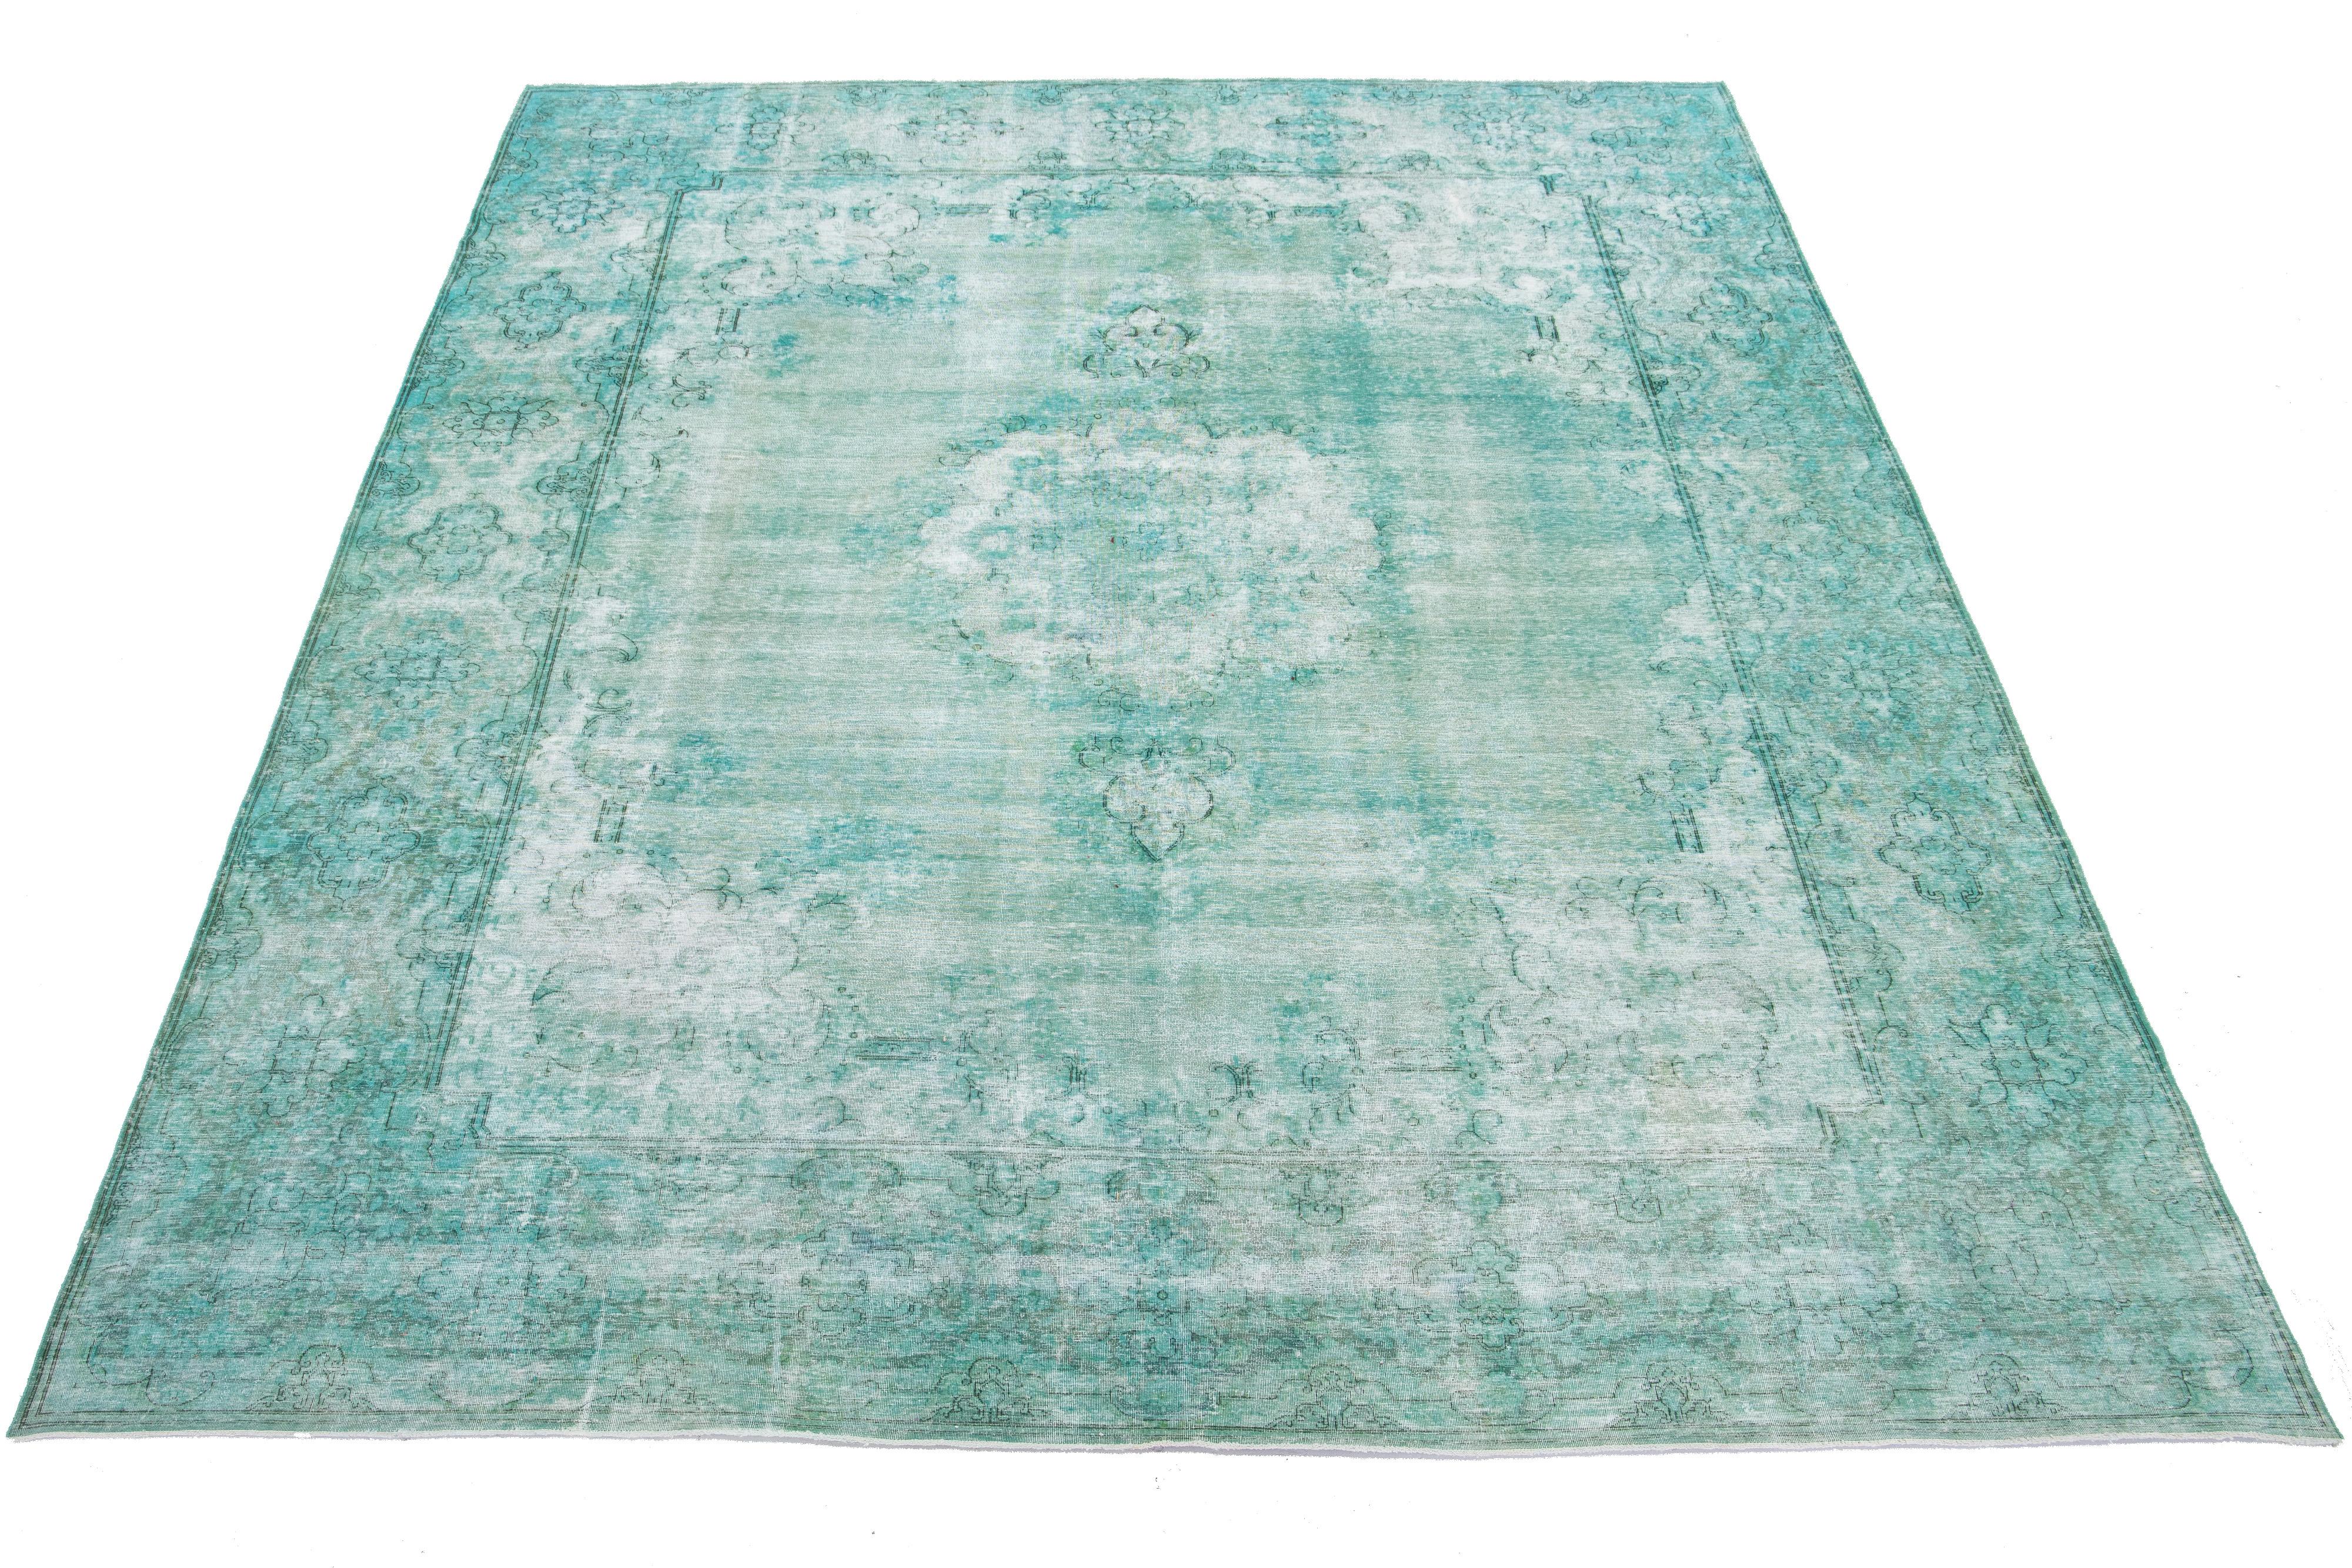 This is an antique hand-knotted wool Persian rug with a light green field. It features a medallion floral design with gray accents.

This rug measures 9'6'' x 13'3